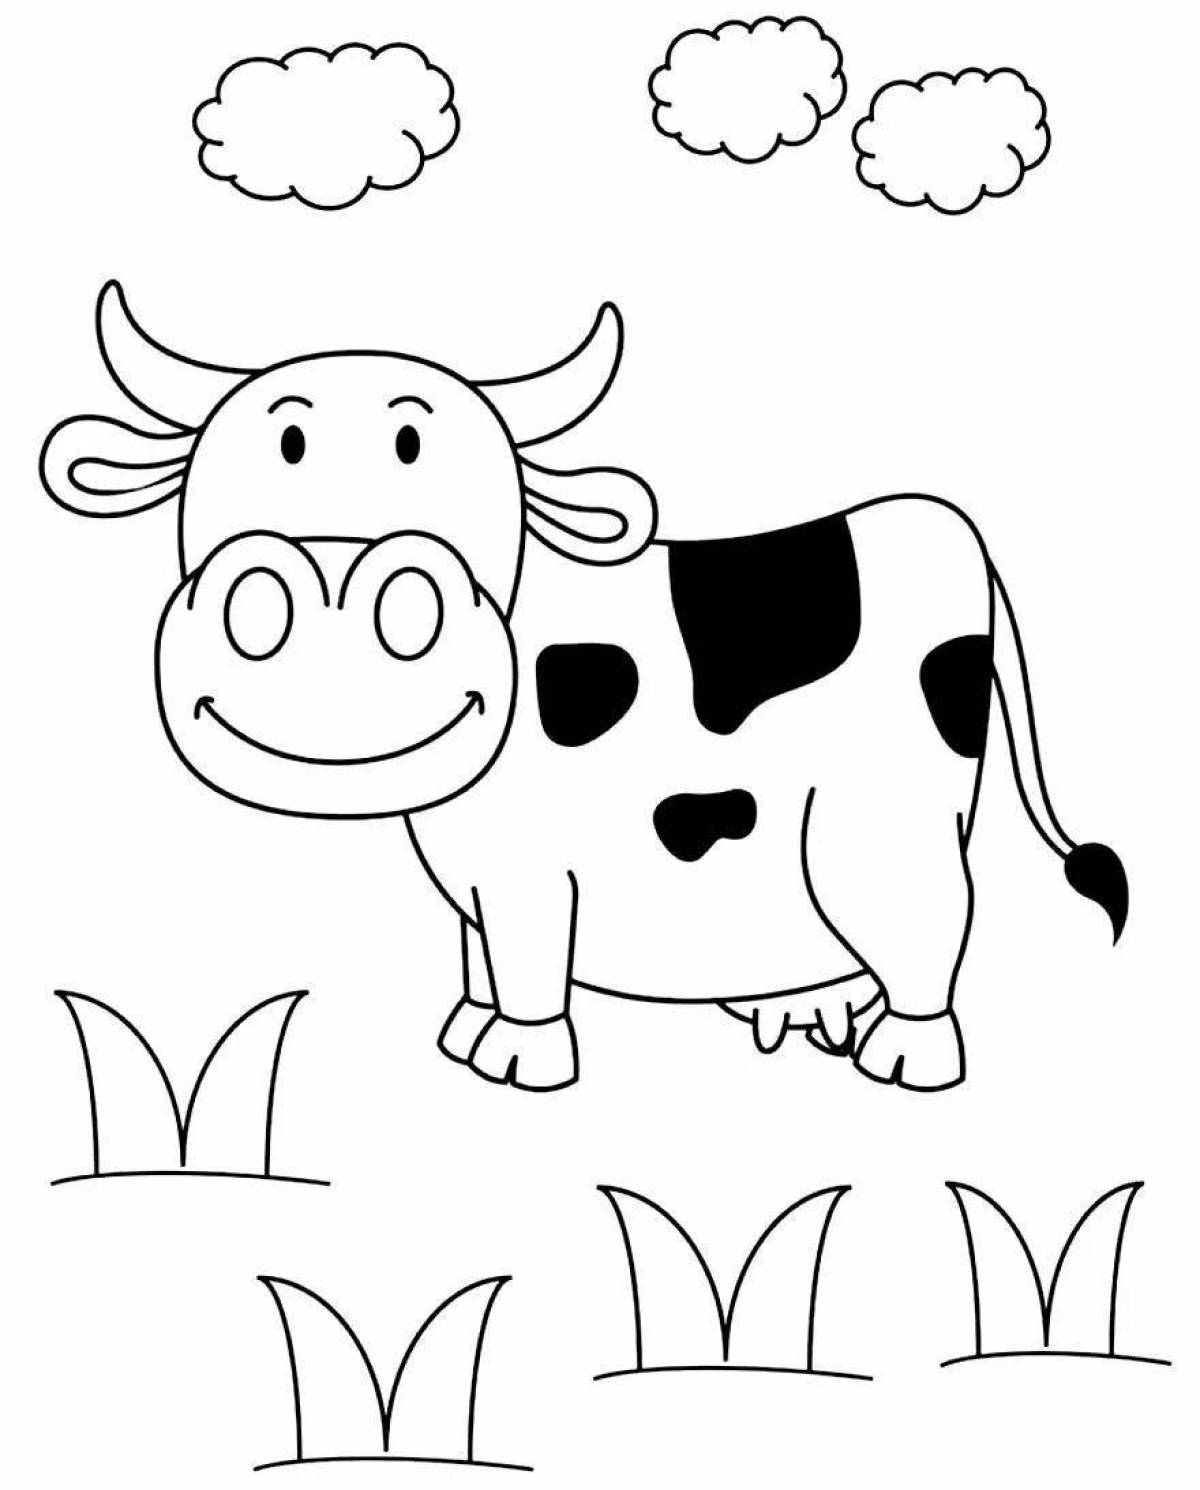 Cow shimmer coloring page for kids